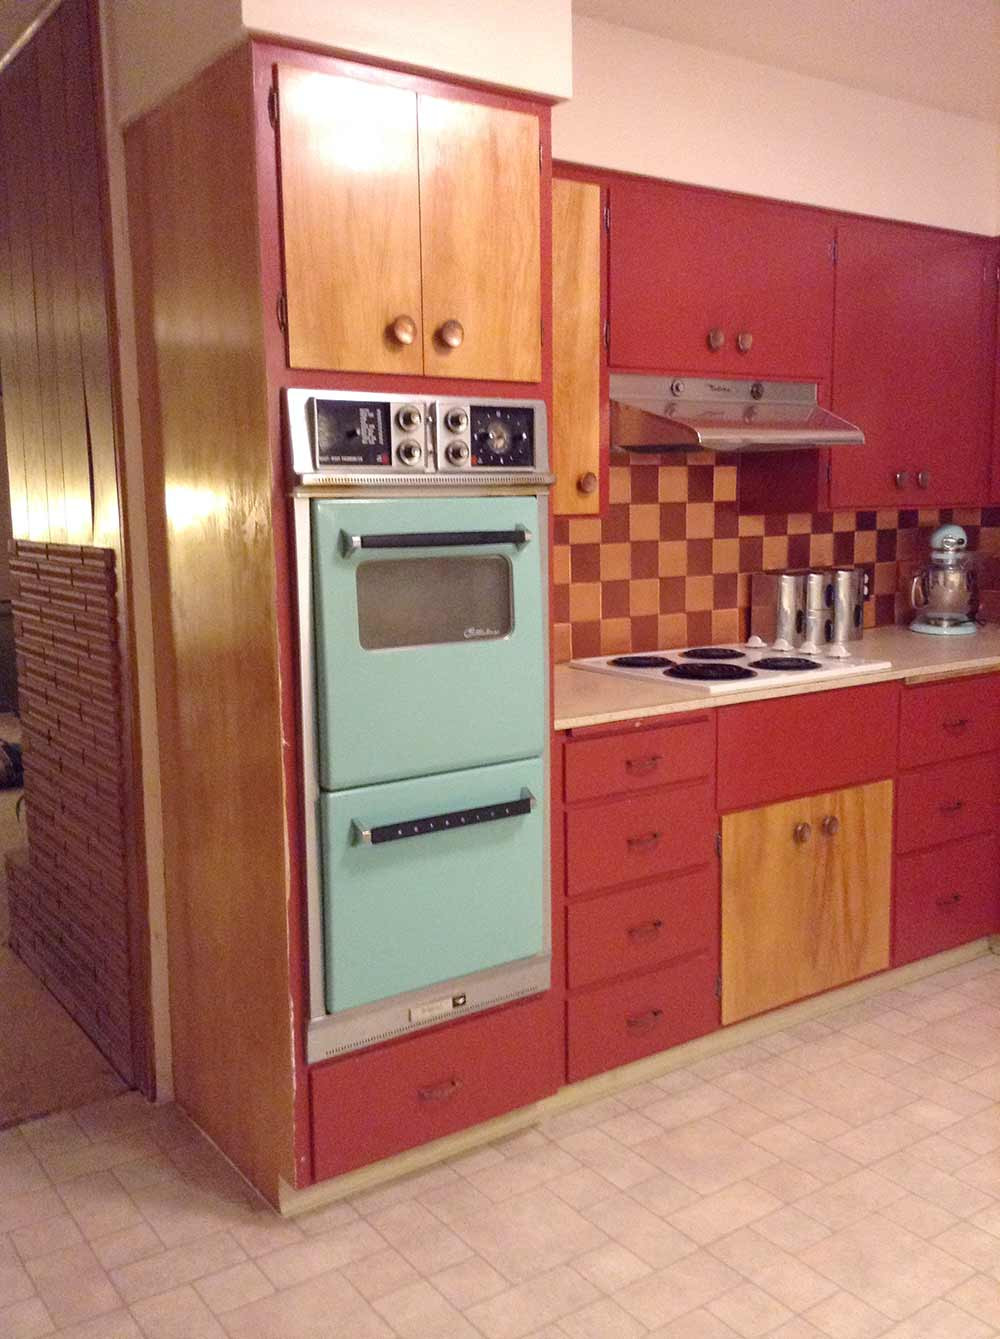 Retro Kitchen Countertops
 Flooring and countertops for Shannan s 1950s kitchen